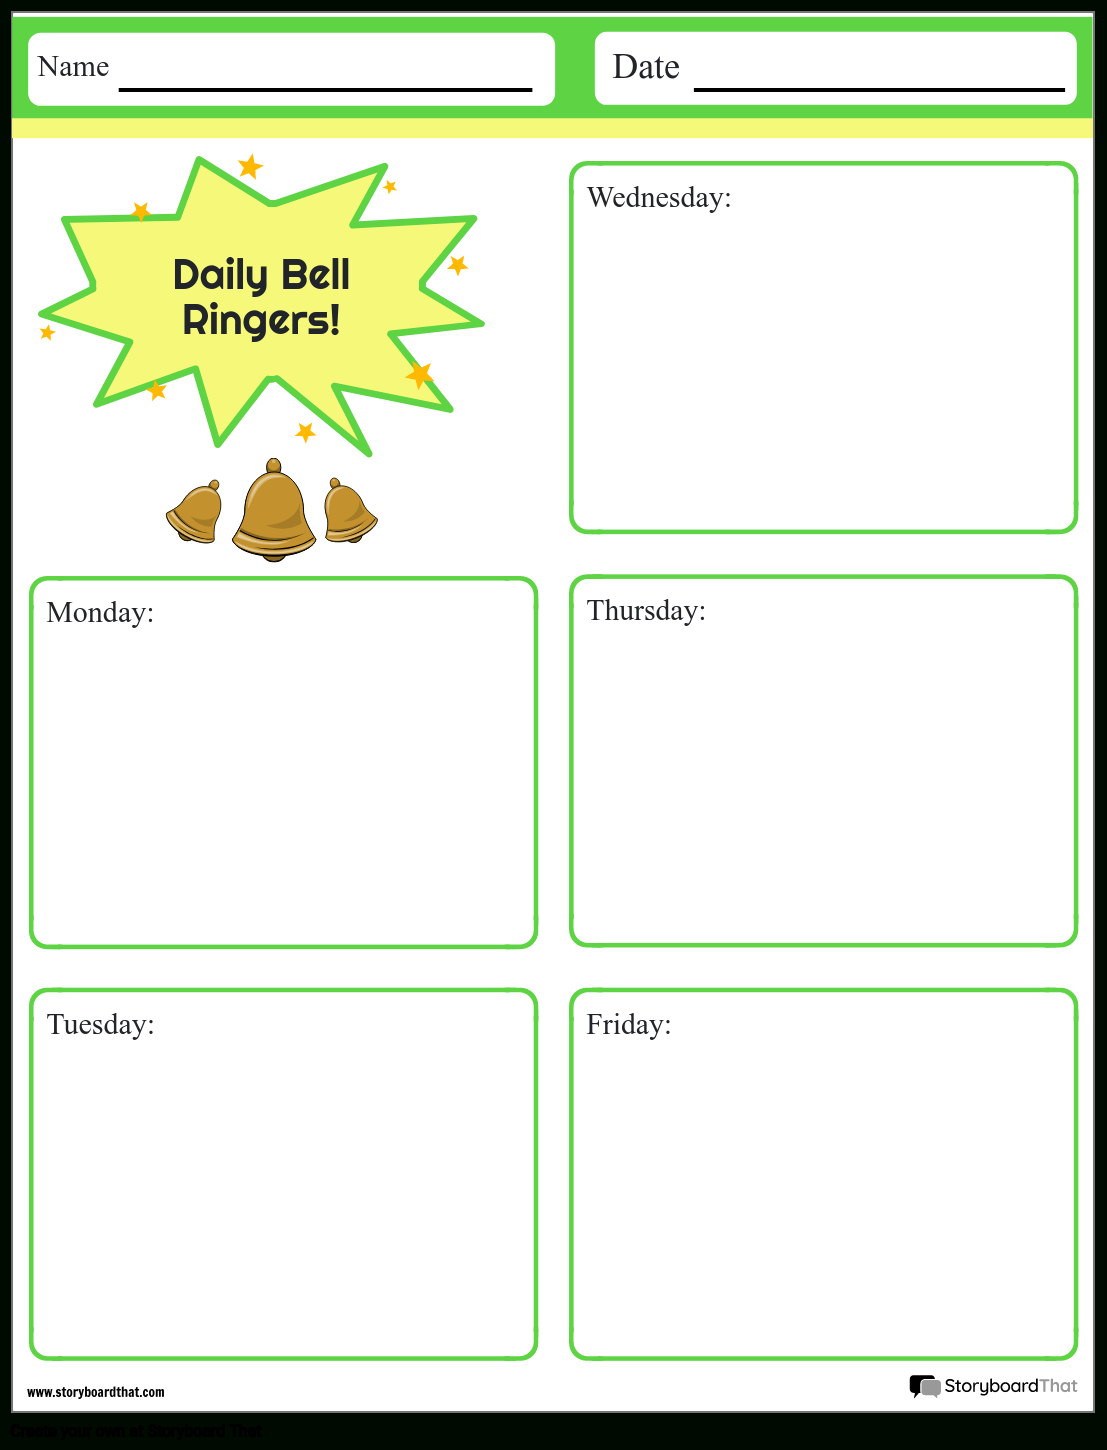 Free Printable Bell Ringers Templates | Storyboardthat regarding Free Printable Bell Ringers